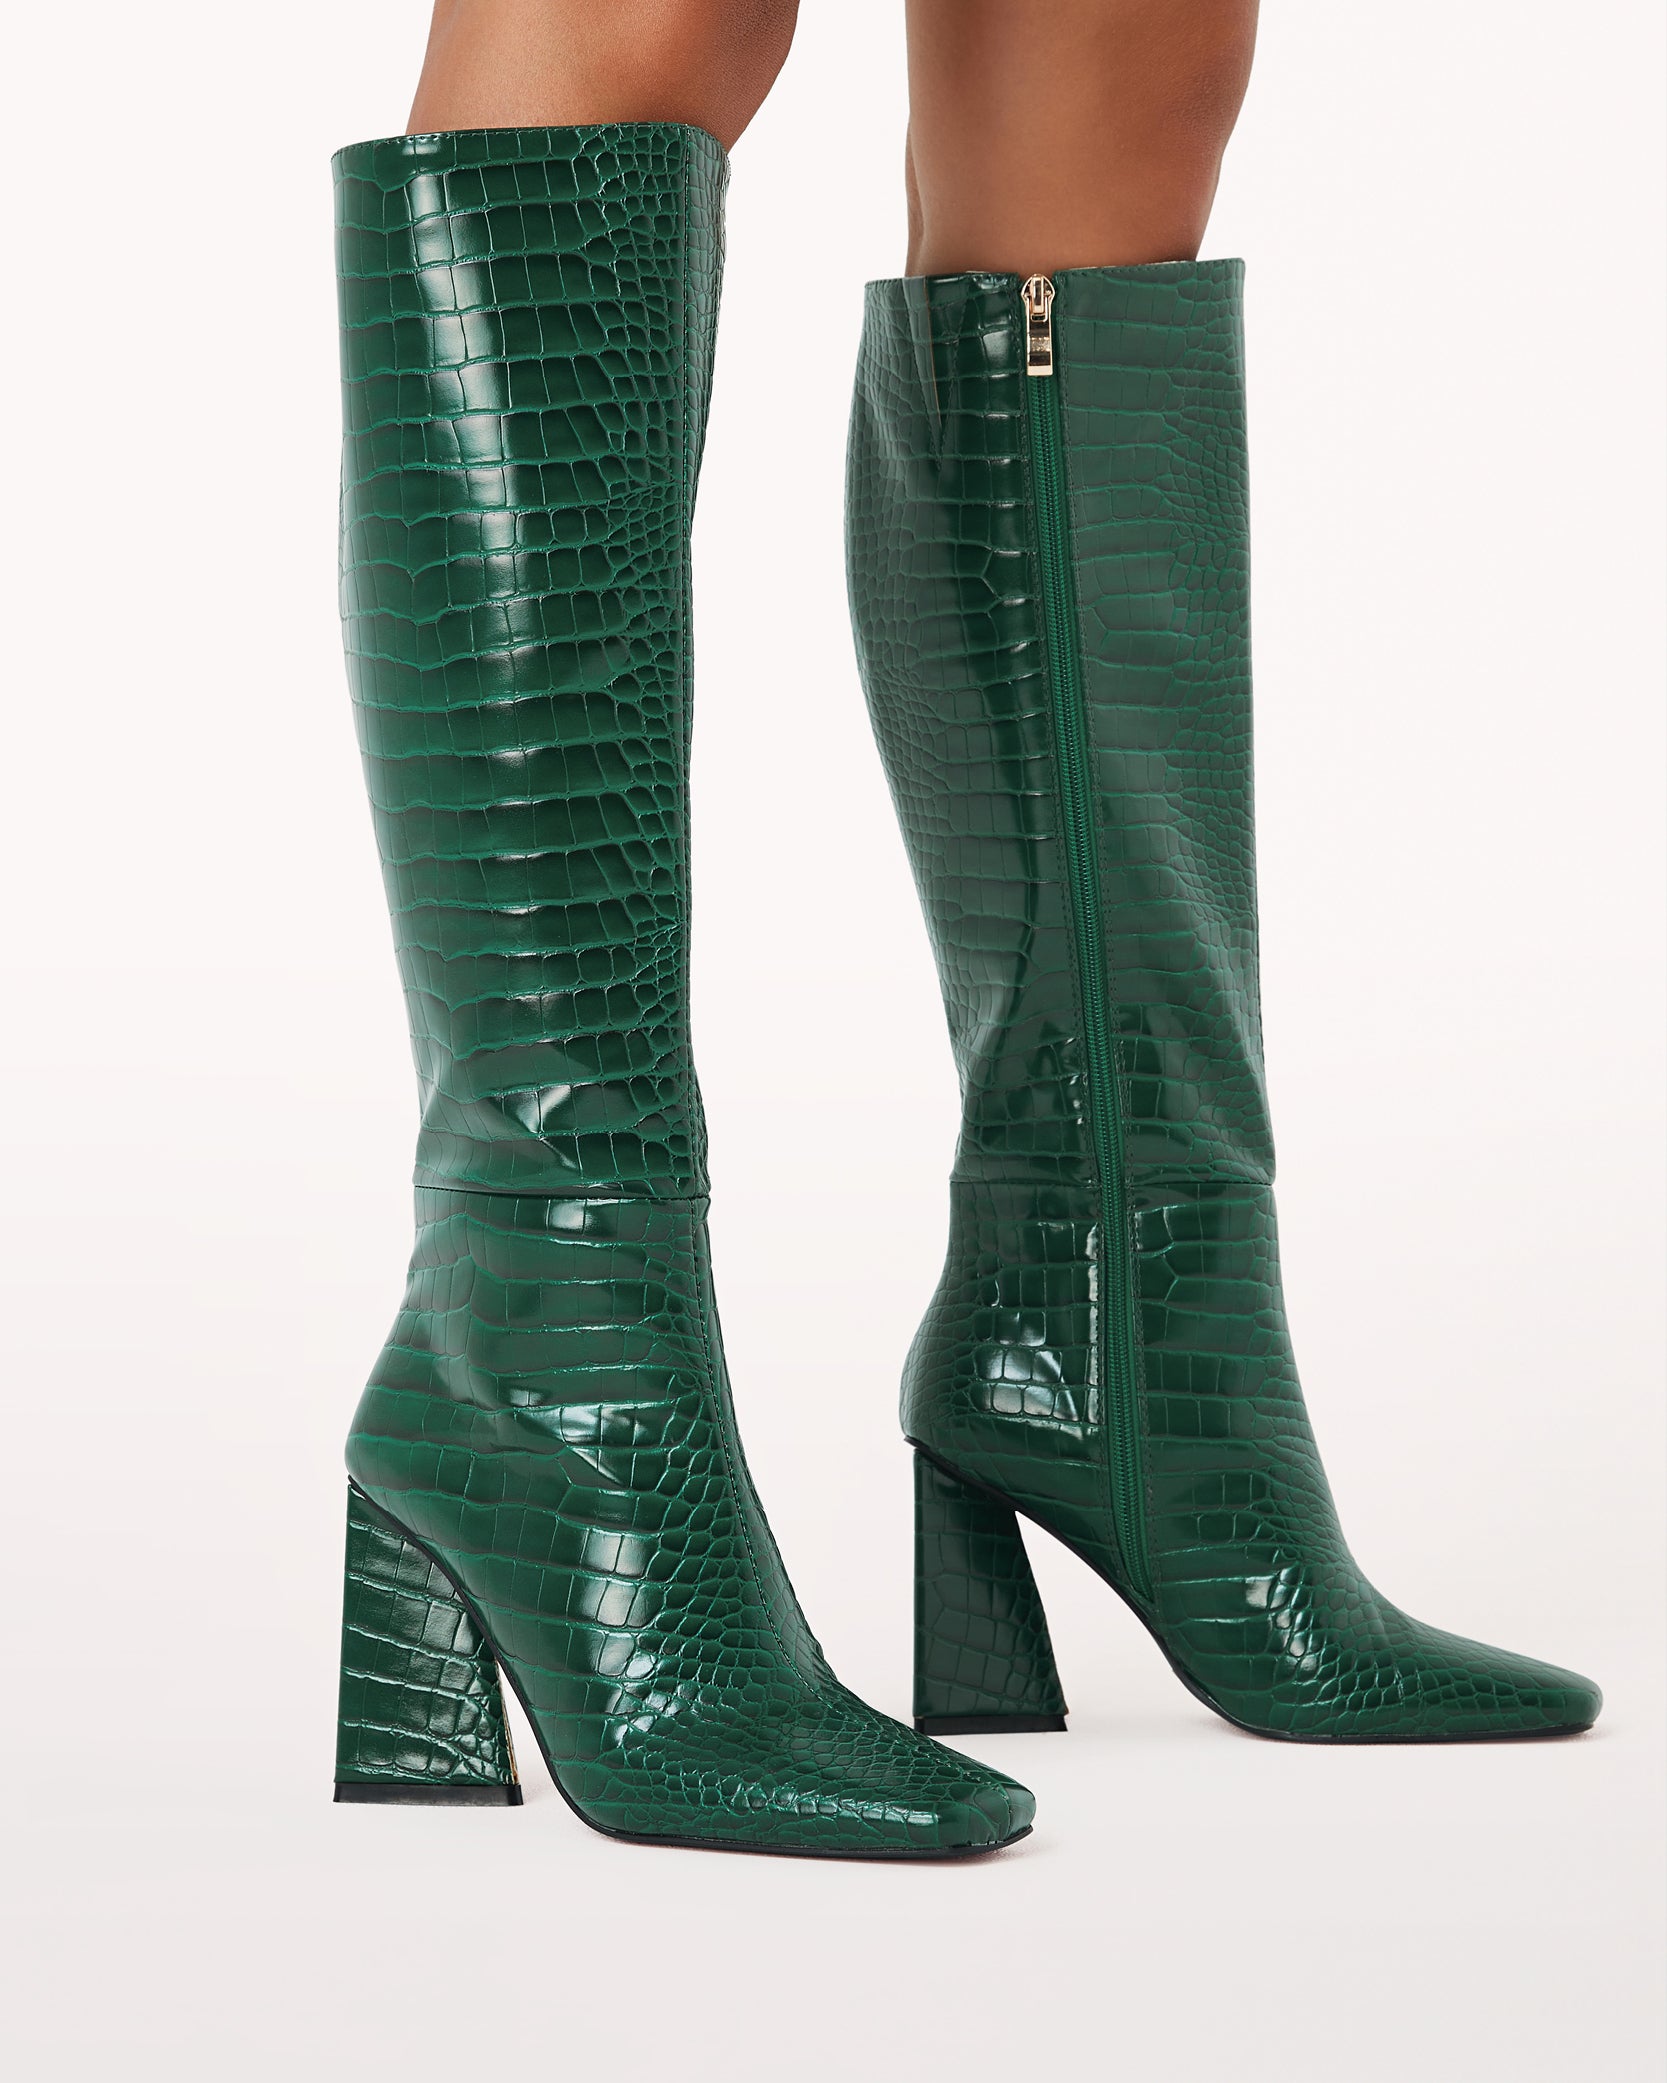 forest green crocodile embossed knee high boot with a square toe and a zipper on the inner part